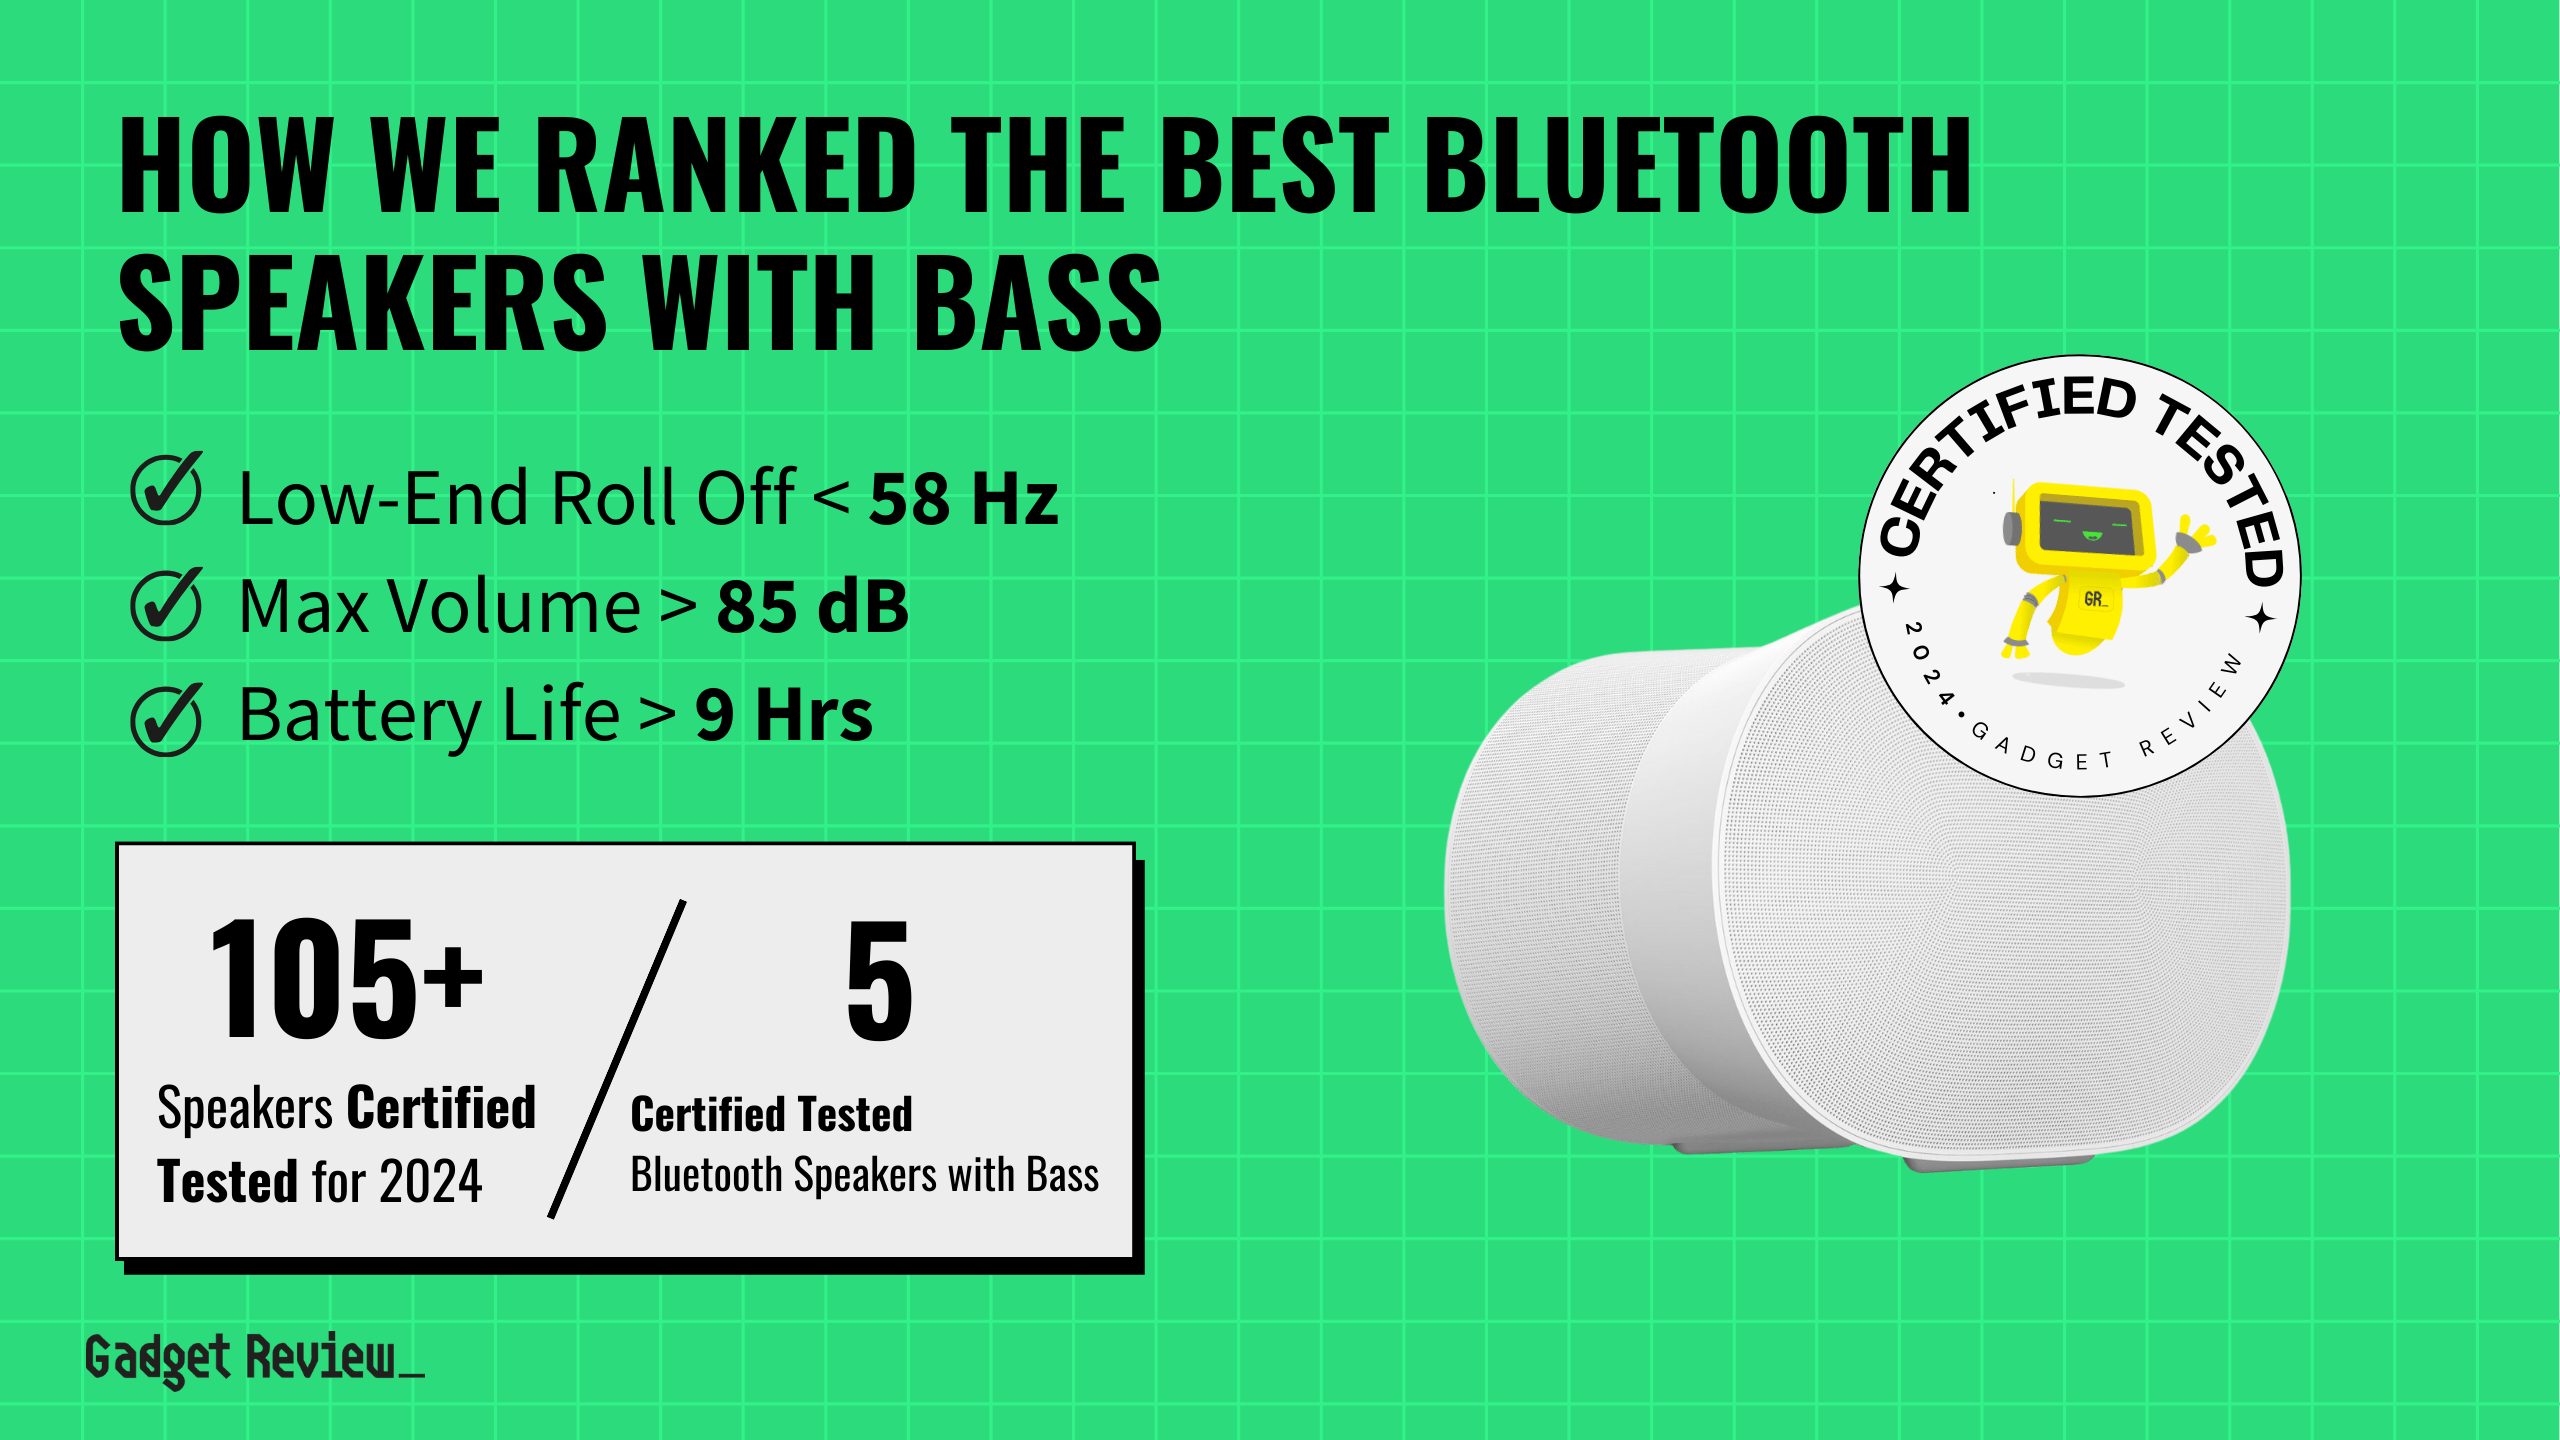 best bluetooth speaker bass guide that shows the top best bluetooth speaker model